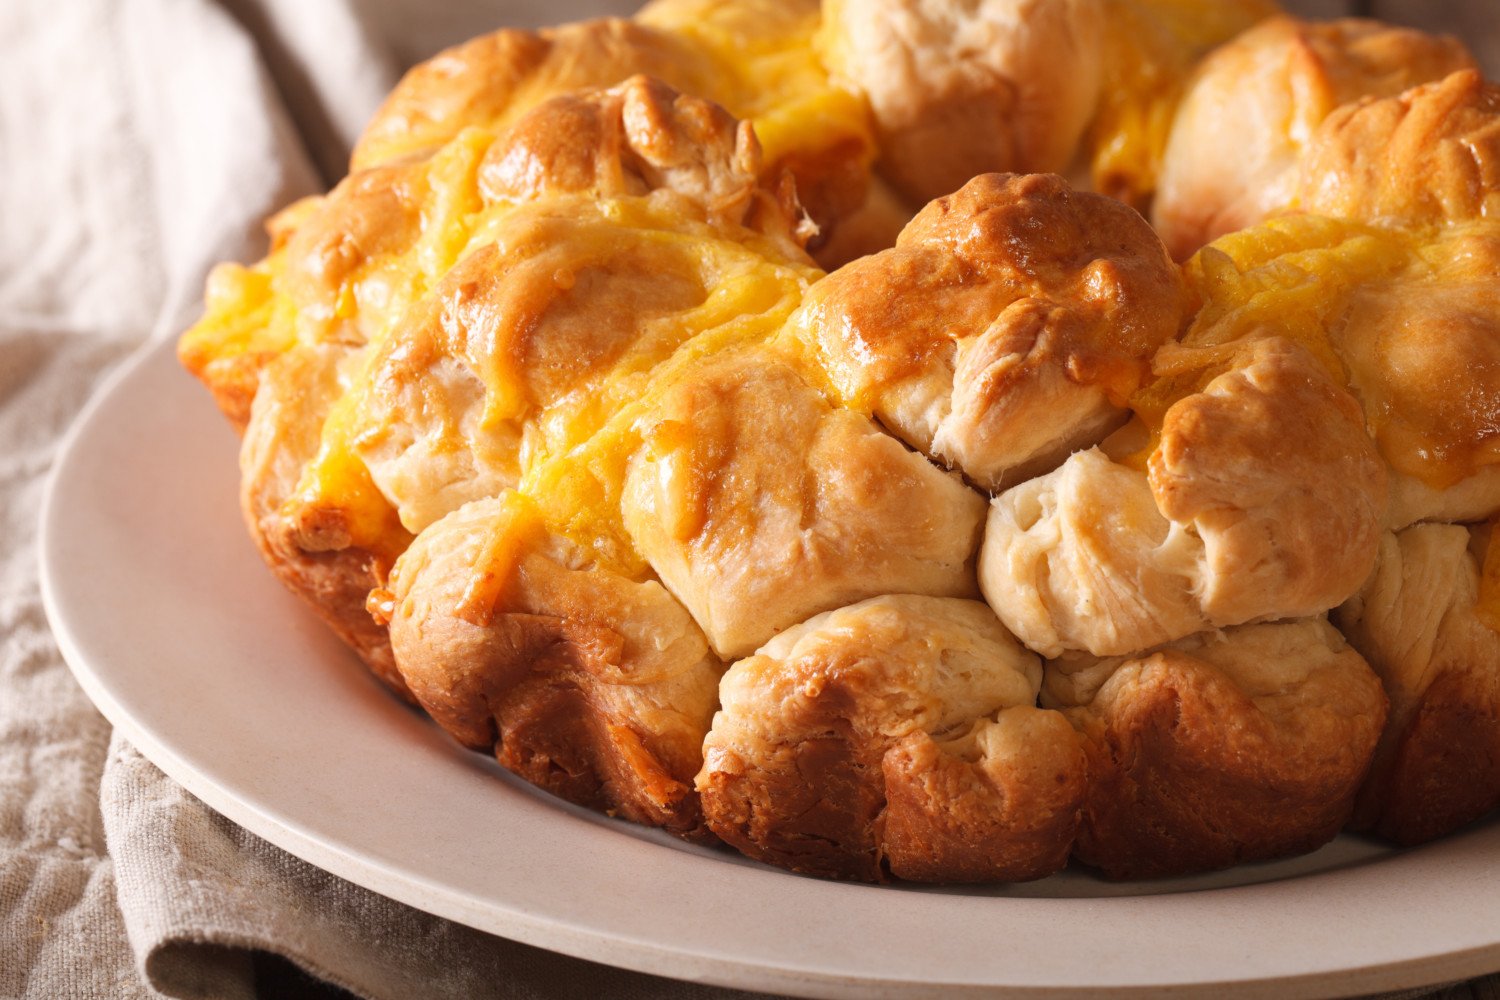 Cheese-topped pull-apart monkey bread on plate